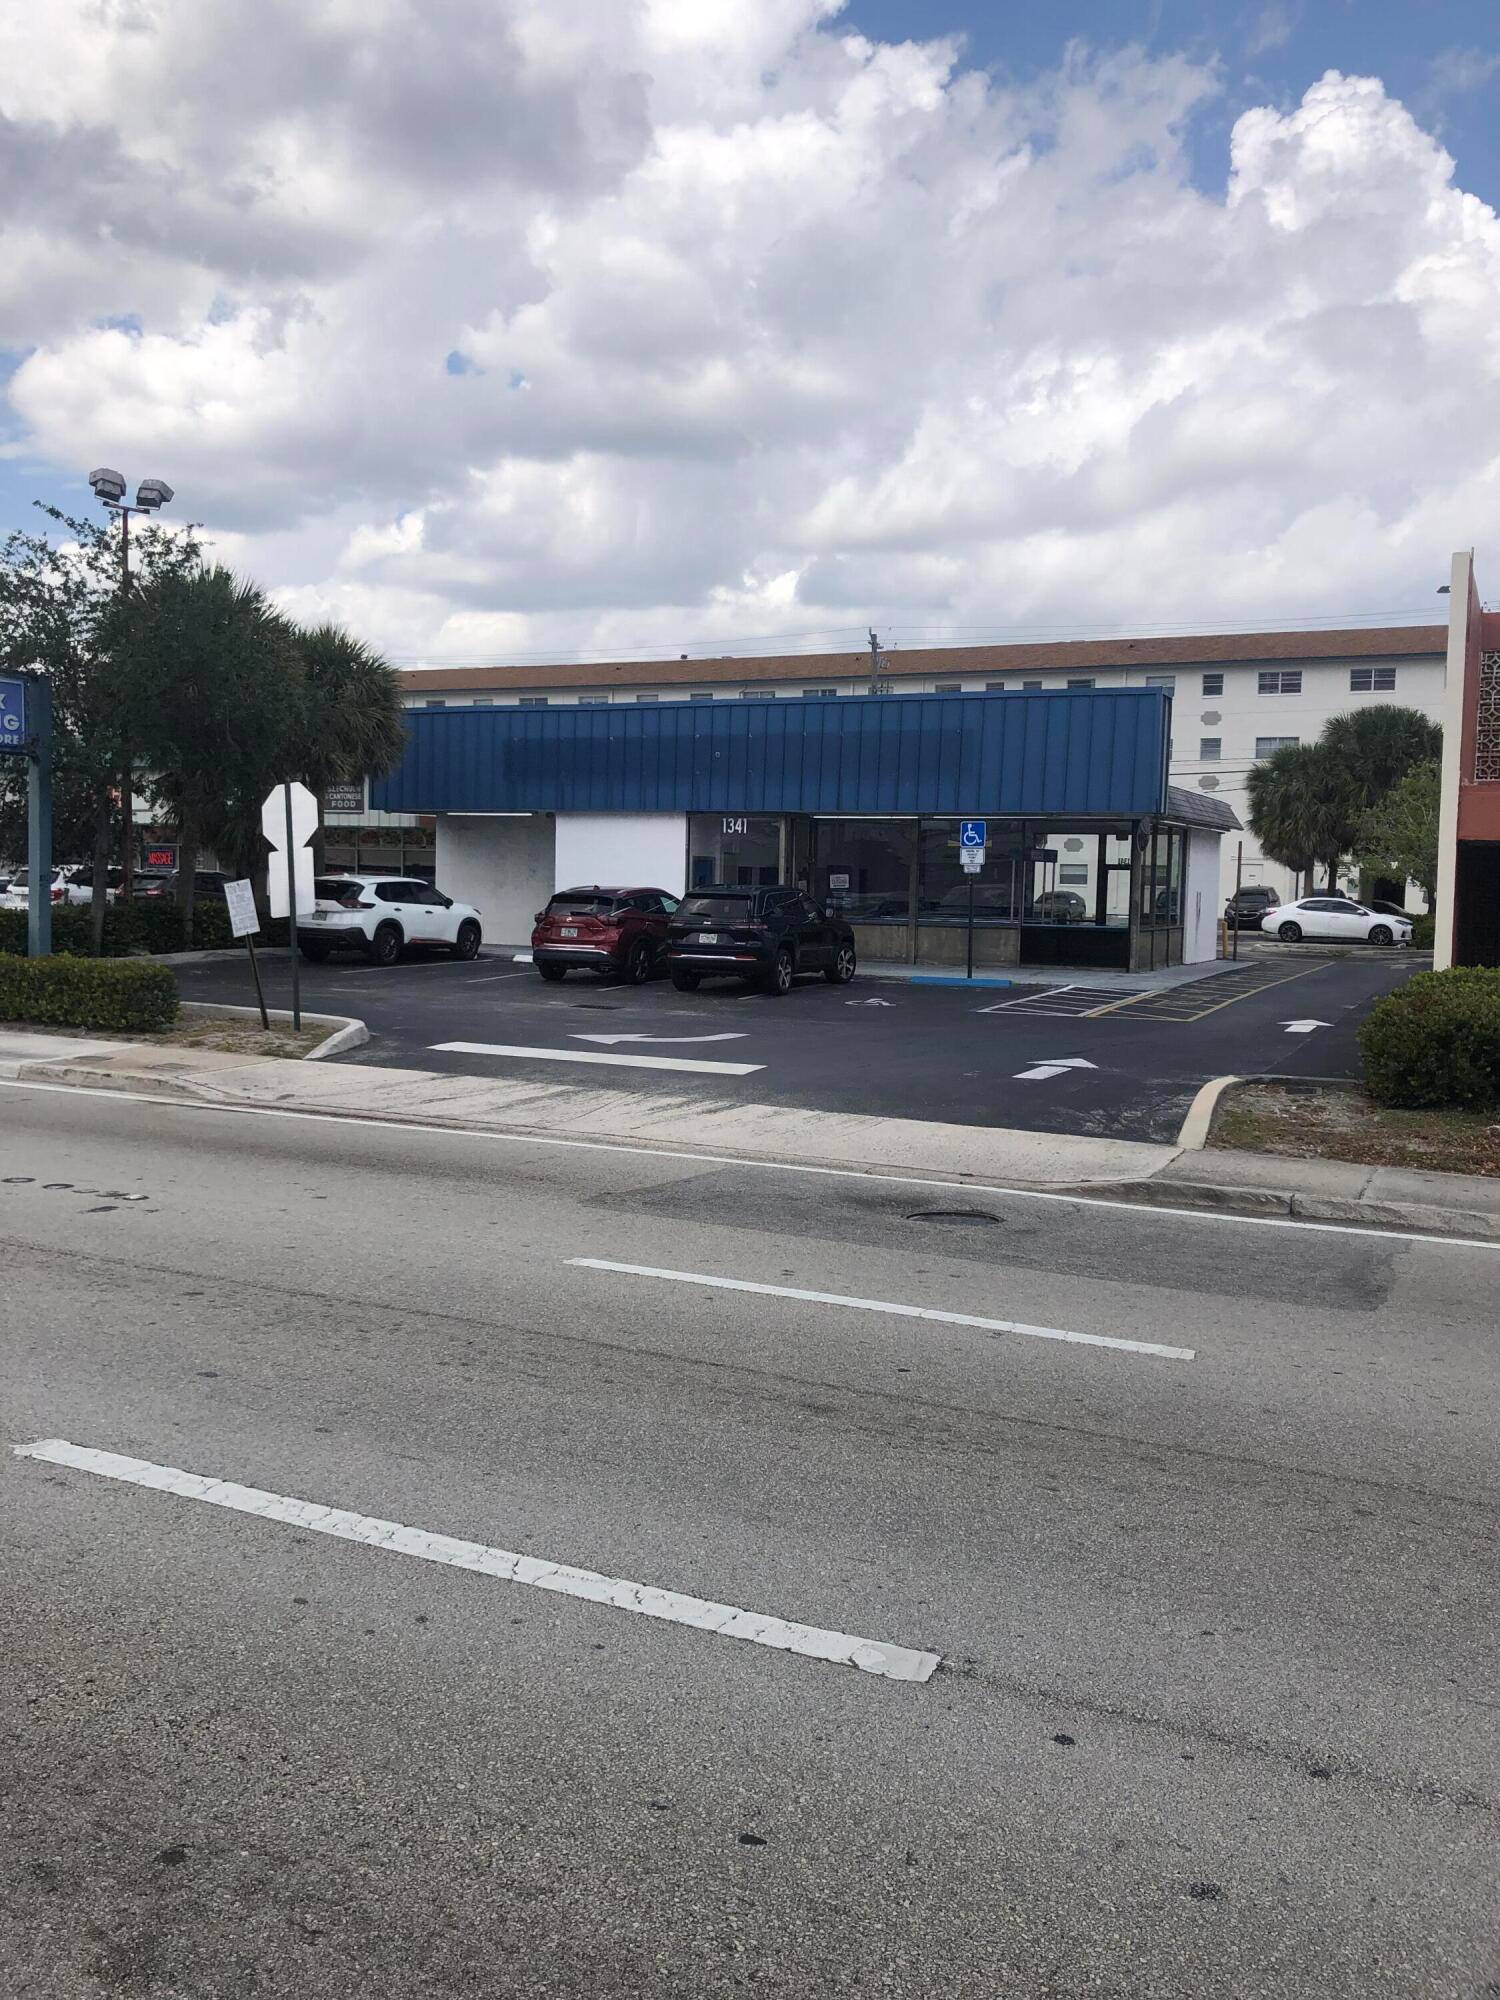 Commercial property with vacant freestanding building located between Dixie Highway and Federal Highway on busy Commercial Blvd.